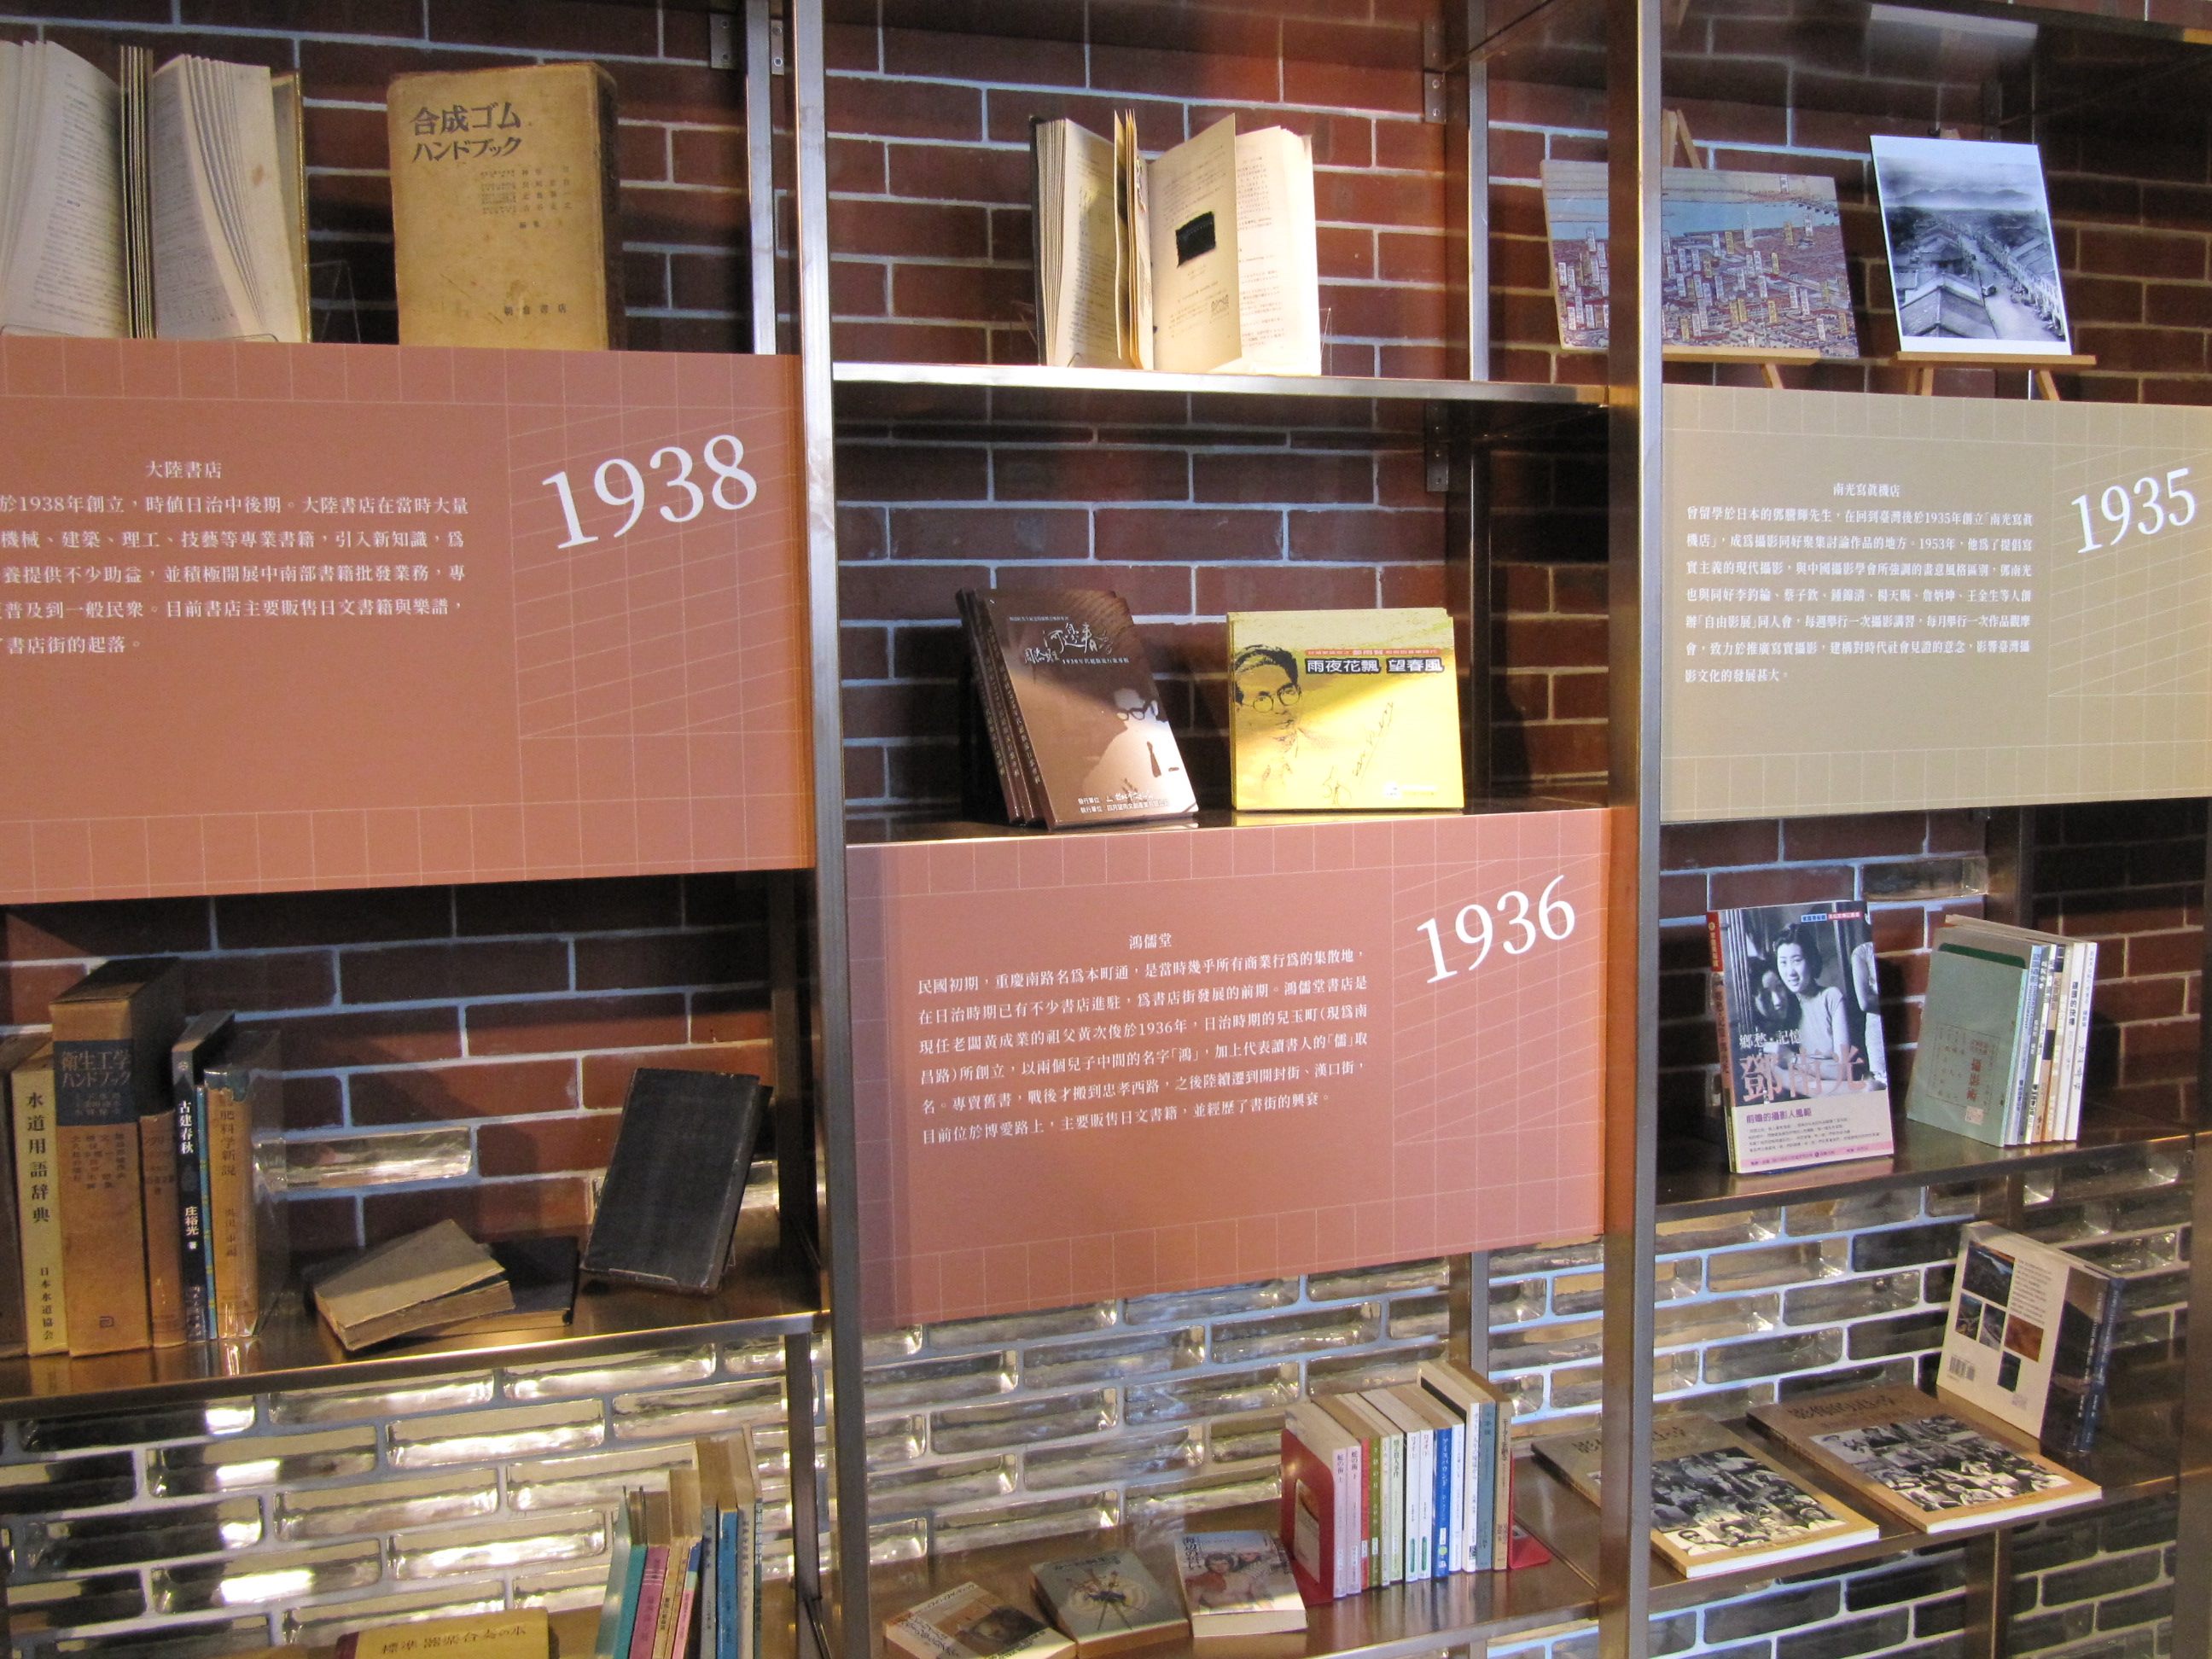 A selection of cultural and historical books on the first floor of the Mitsui Warehouse.